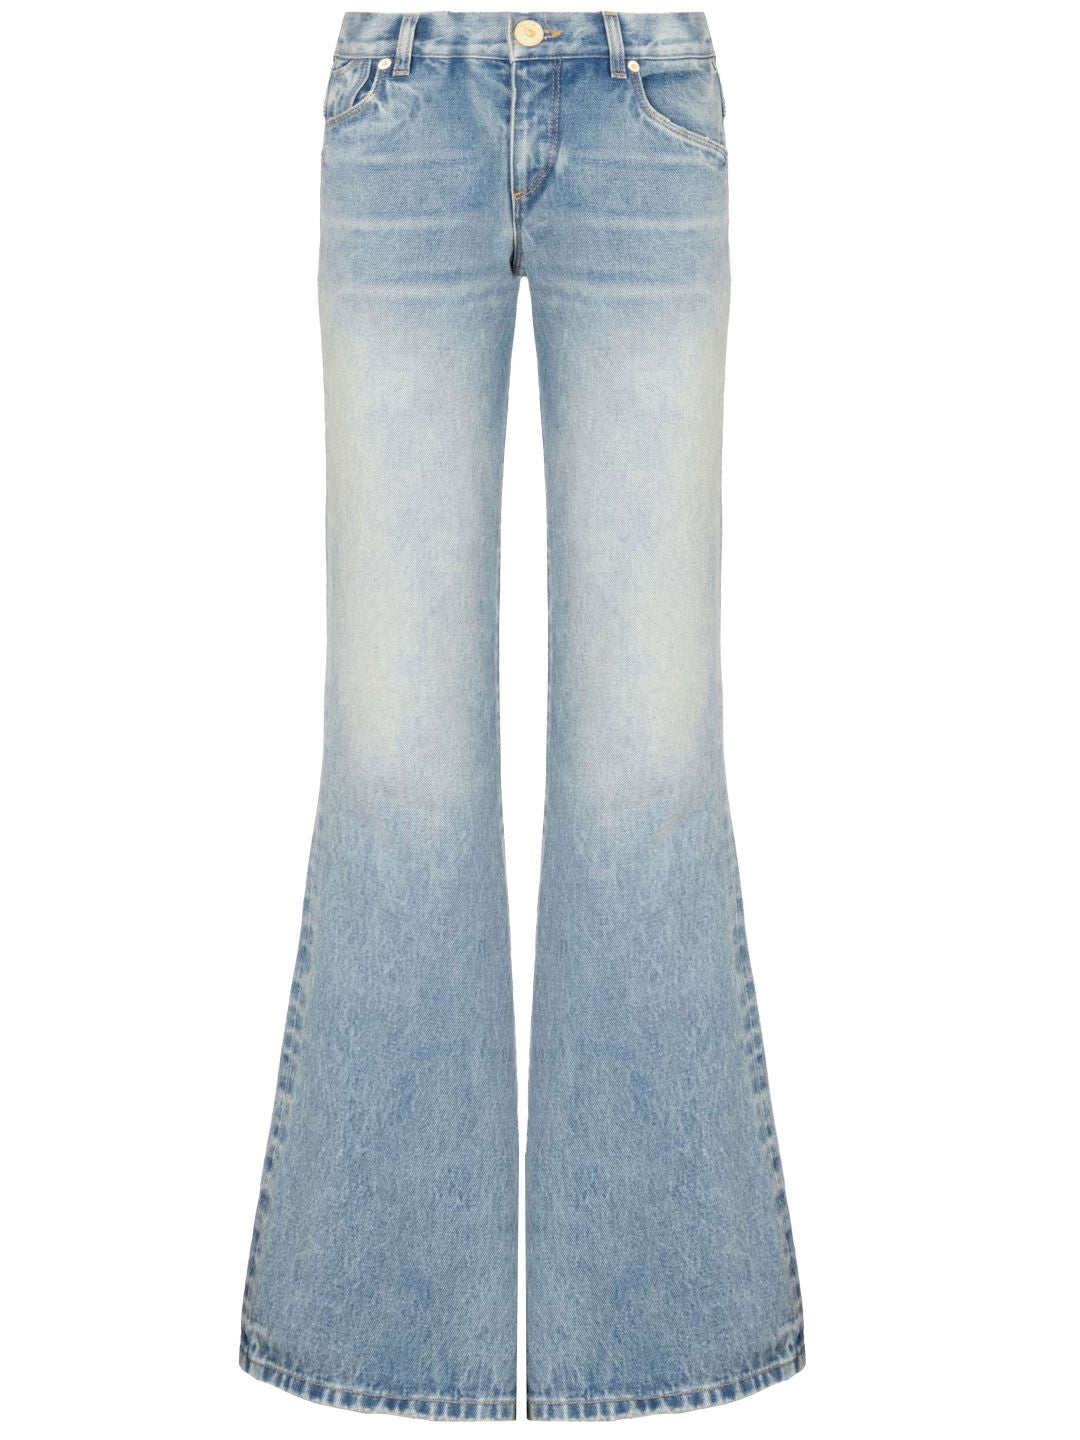 Fashionable Low-Waist Western Bootcut Jeans in Vintage Washed-out Denim